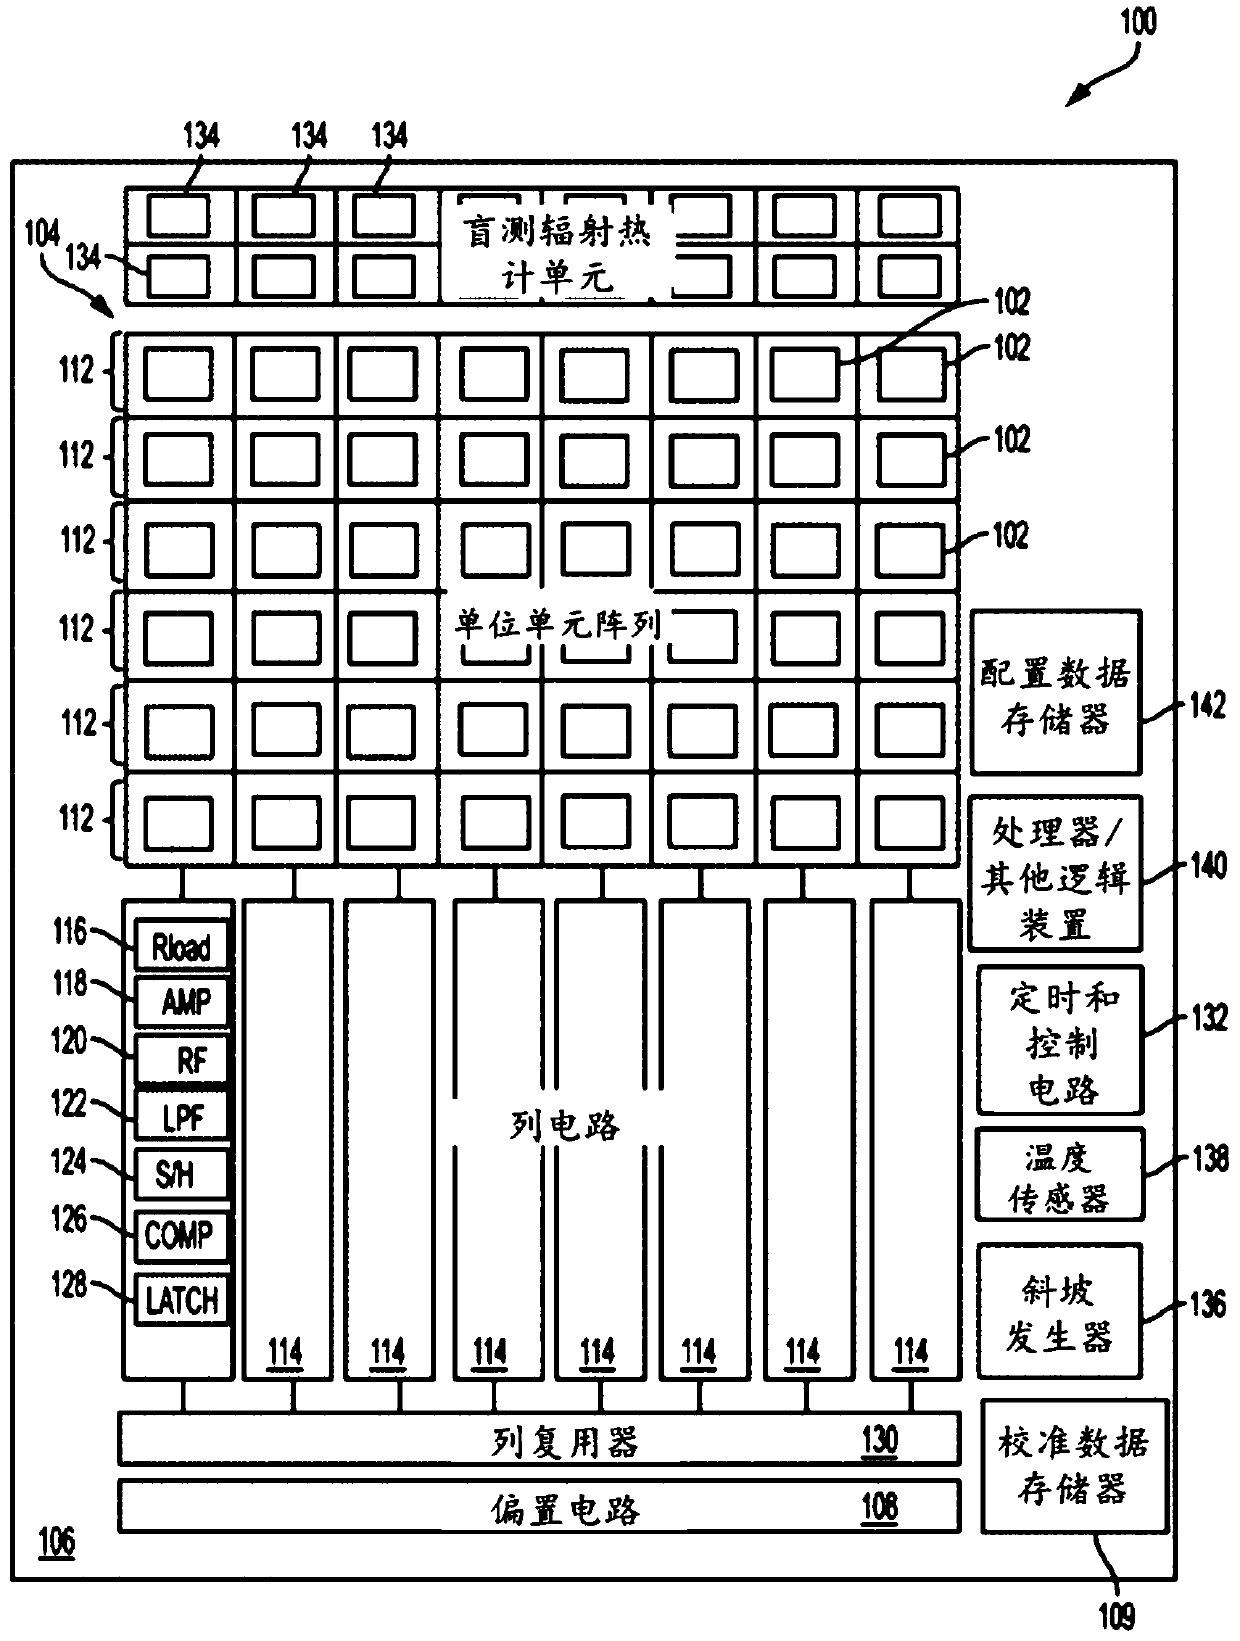 Low cost and high performance bolometer circuitry and methods